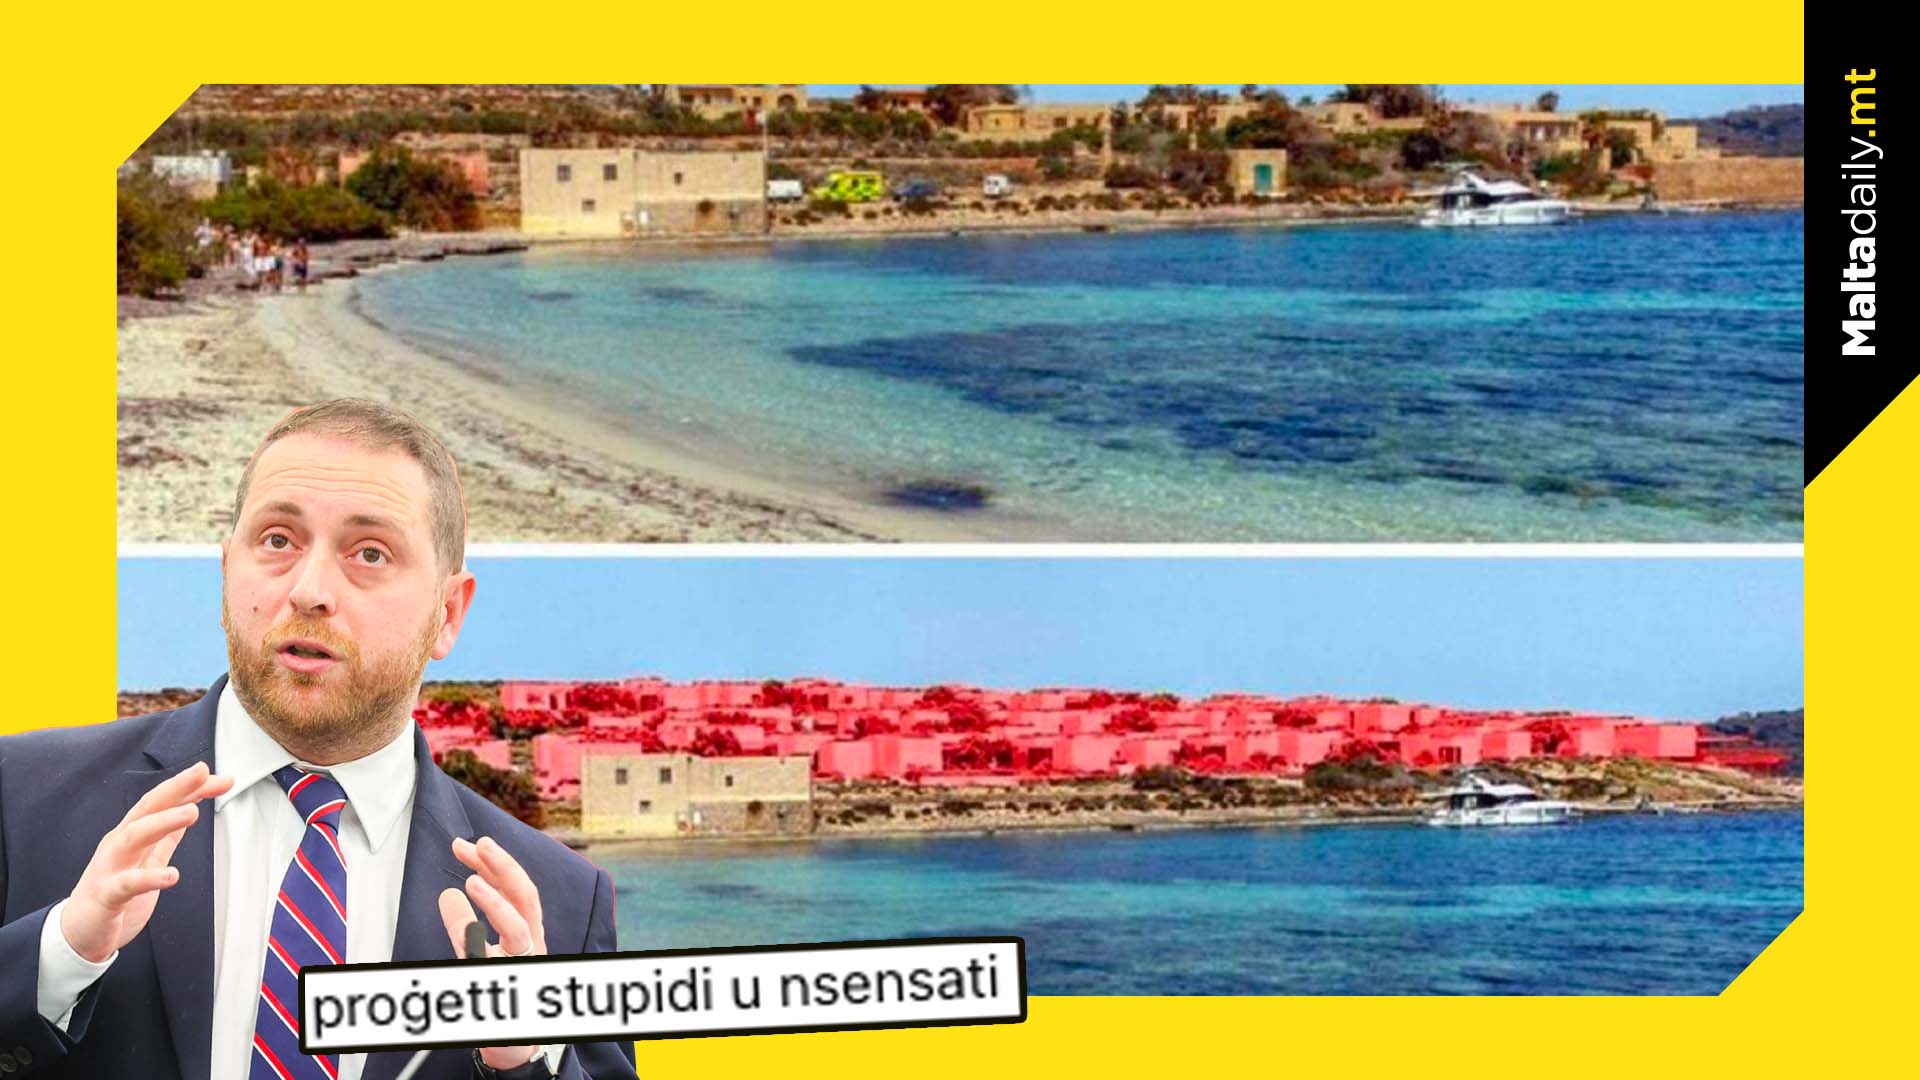 Labour MEP openly slams Comino bungalows as stupid and nonsensical